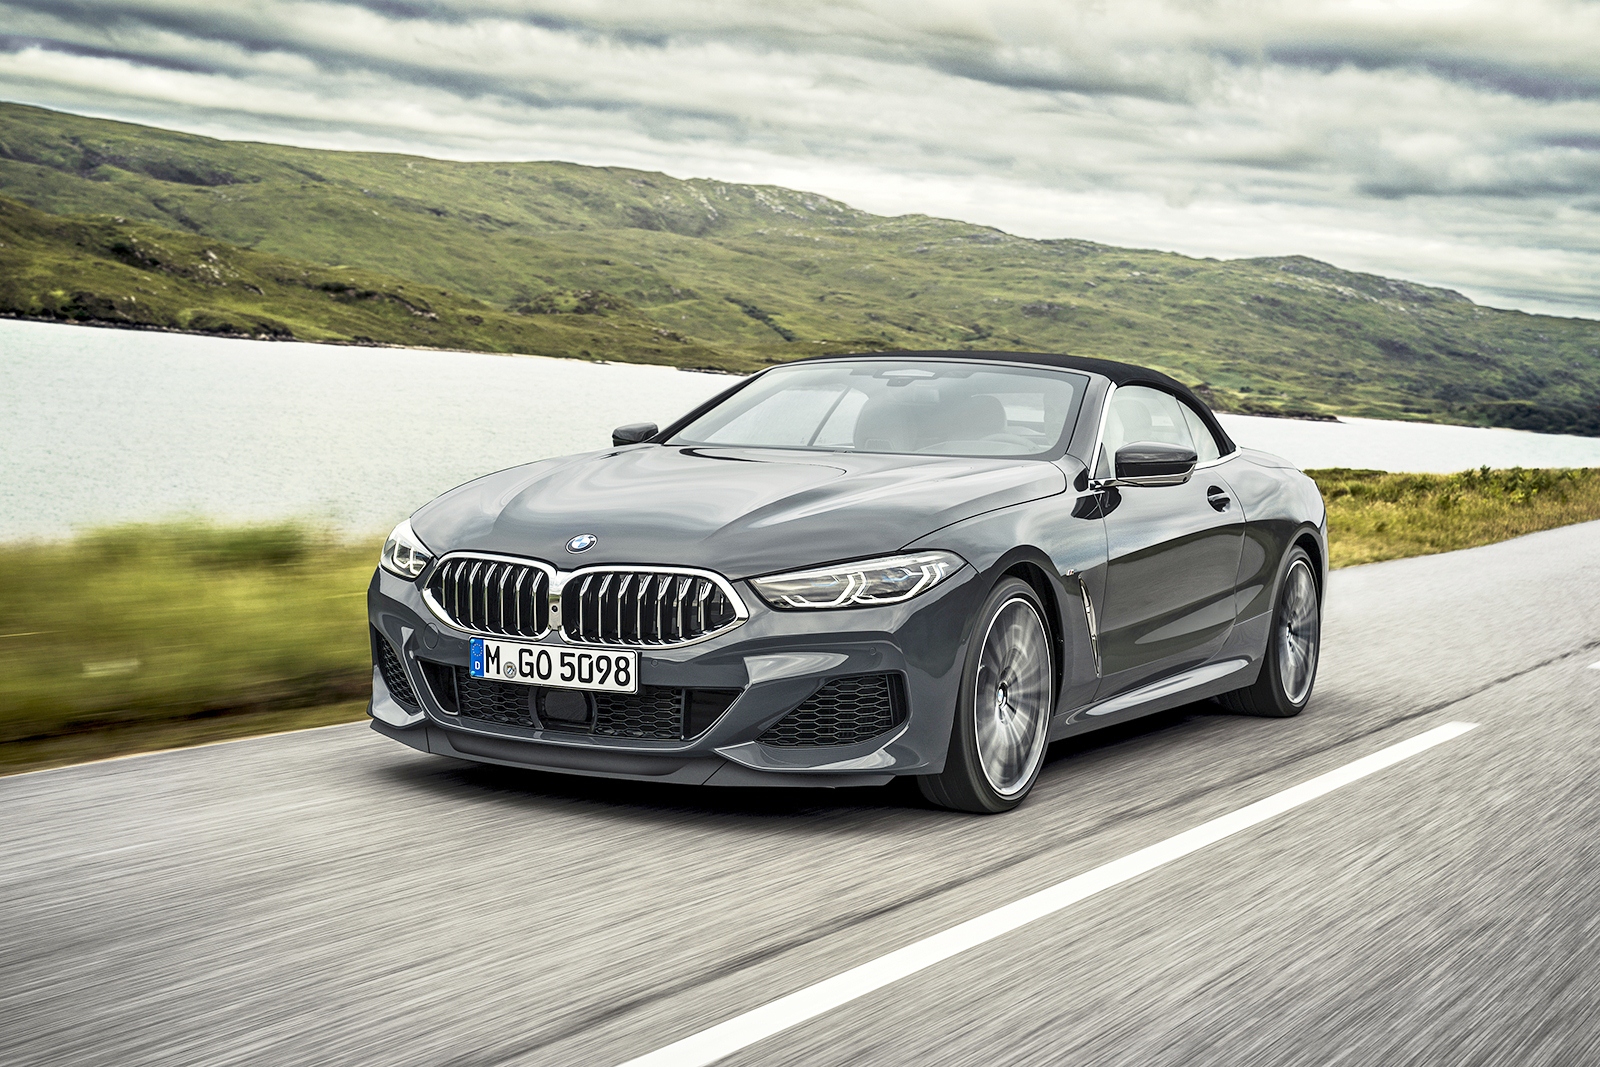 BMW-8-Series-Convertible-2019-530-ma-luc-0-100-km-h-trong-3-9-giay-anh-1